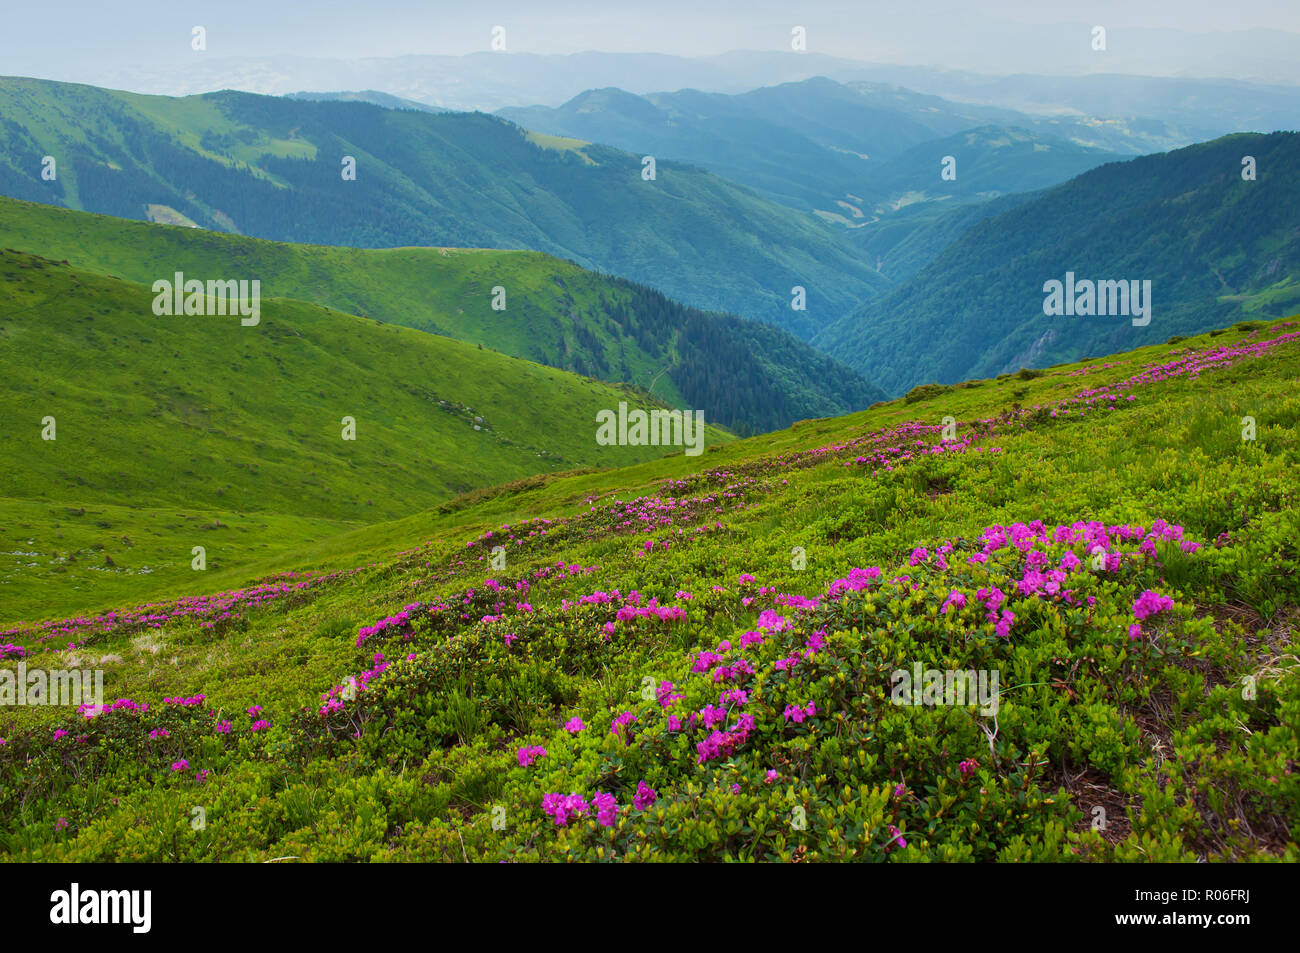 Valley among majestic green rugged mountain hills covered in green lush grass. Closeup of many pink blossoming rhododendron flowers. Summer day in Jun Stock Photo